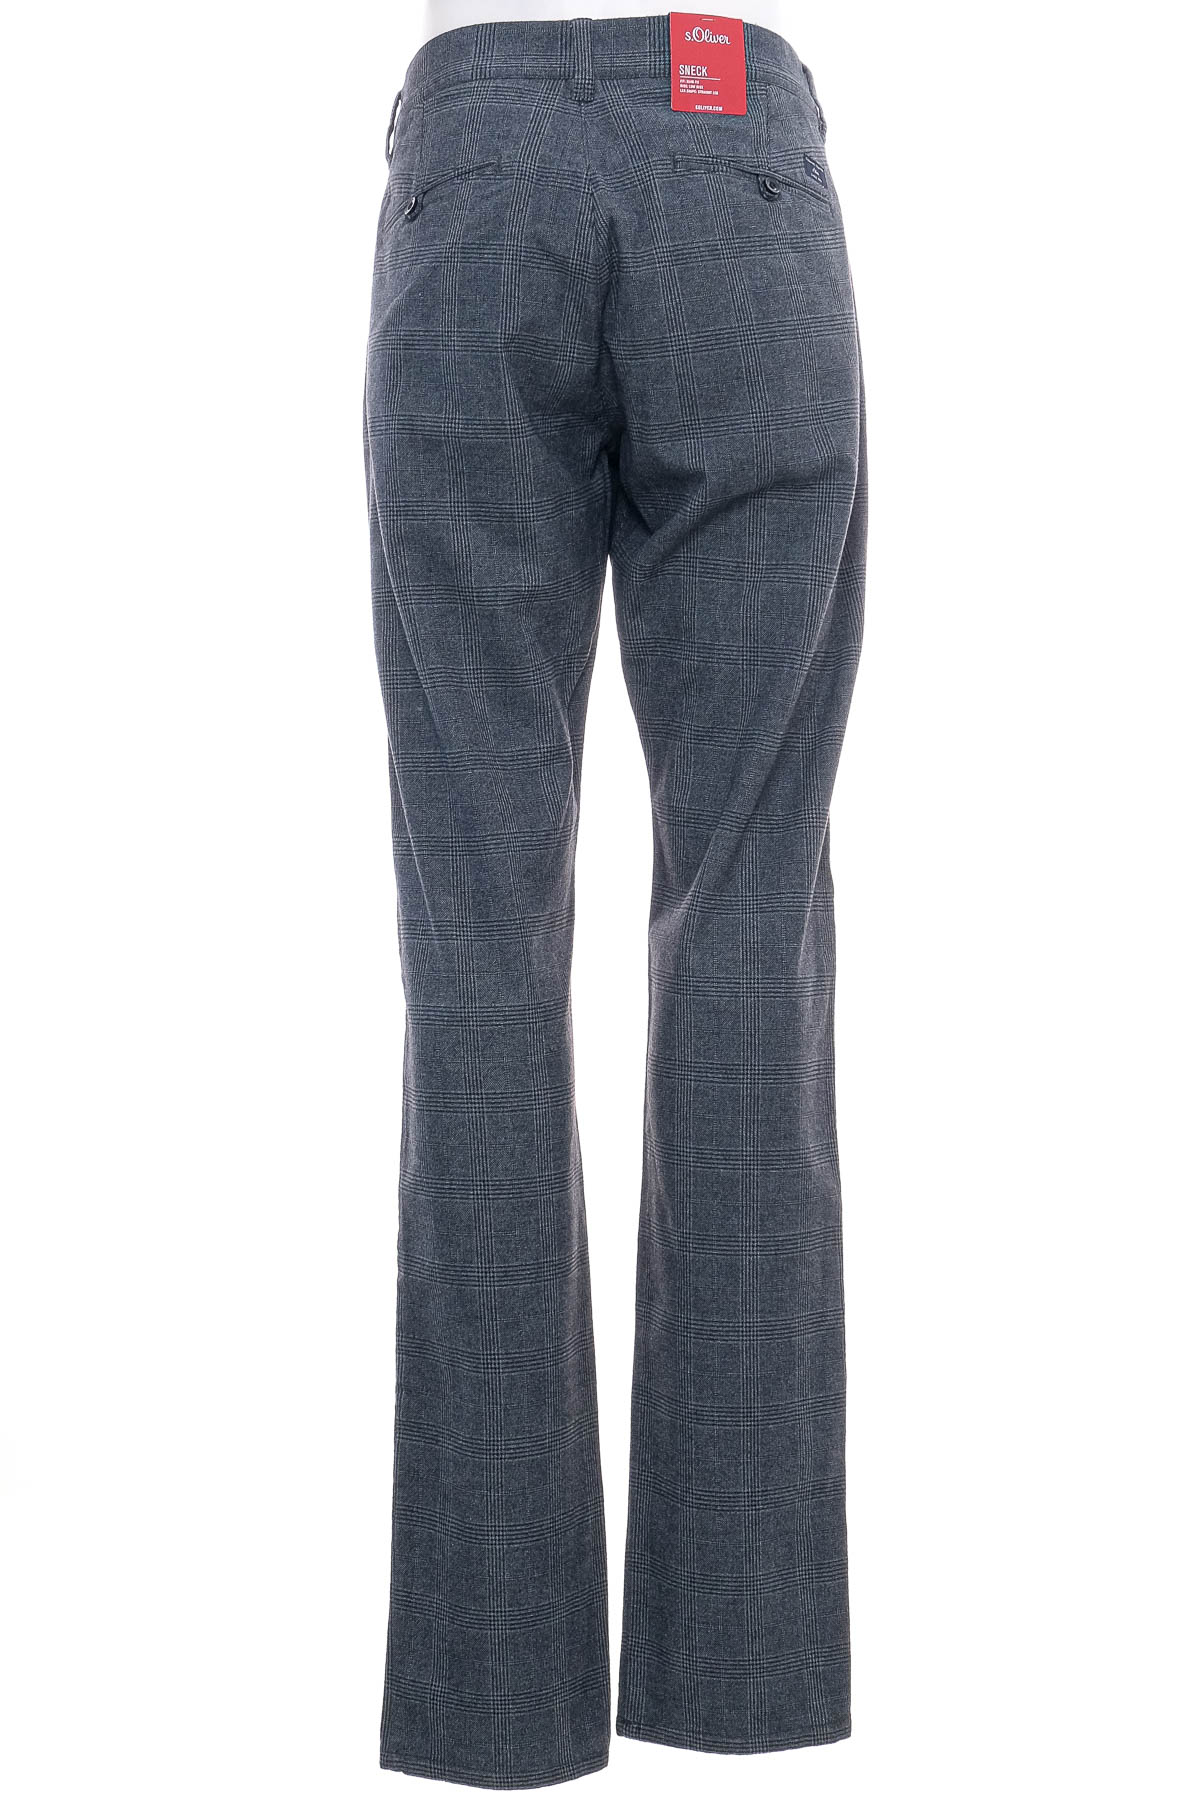 Men's trousers - S.Oliver - 1